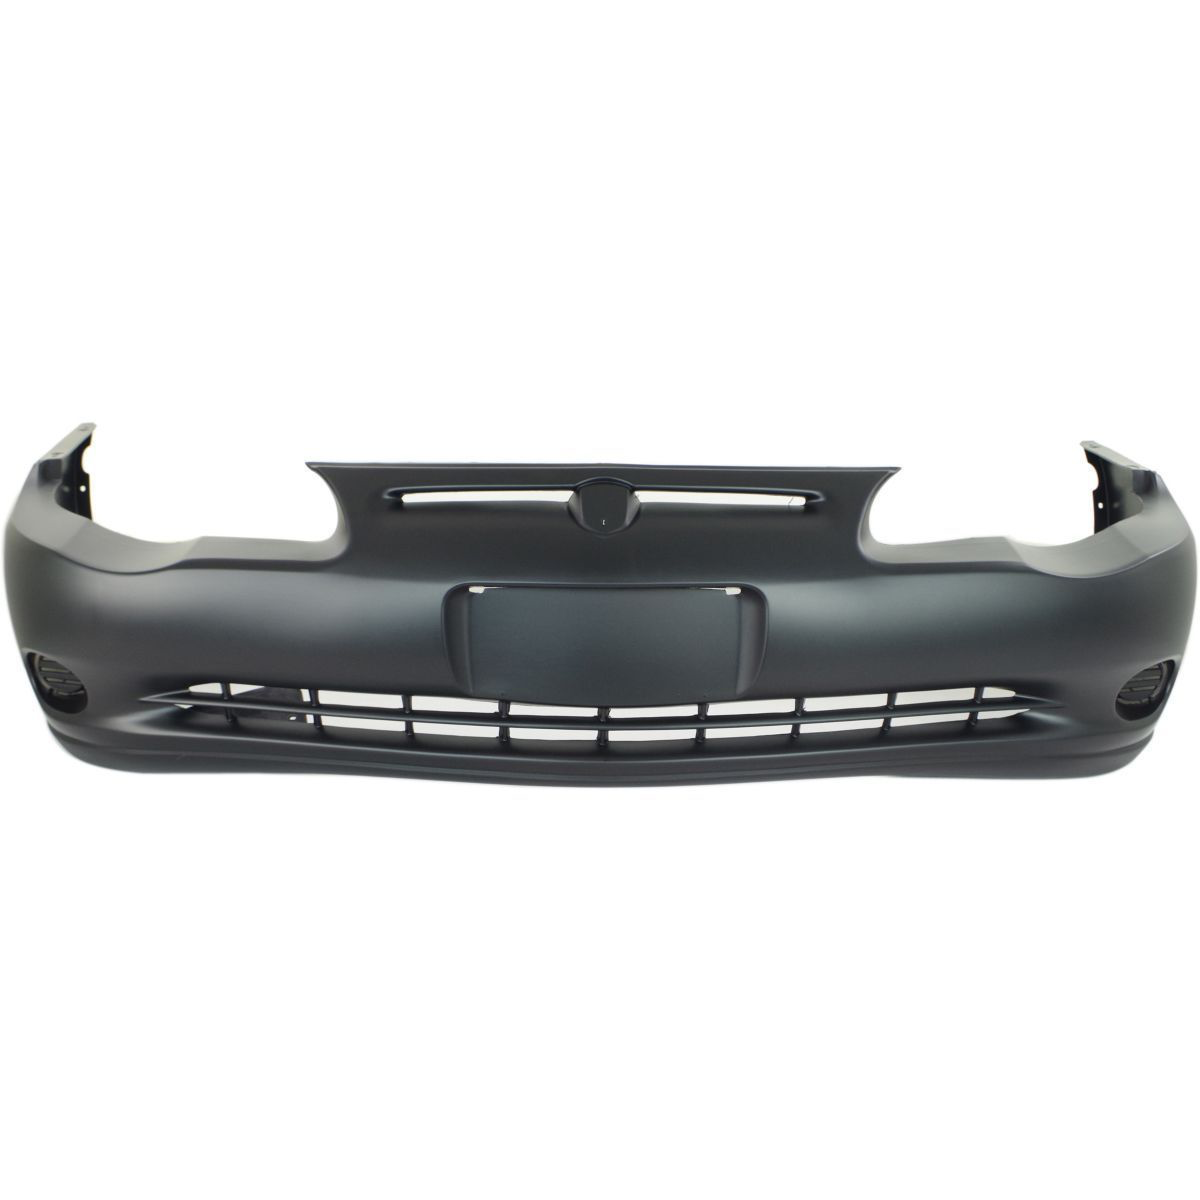 2000-2005 CHEVY MONTE CARLO Front Bumper Cover SS  w/o Sport Painted to Match